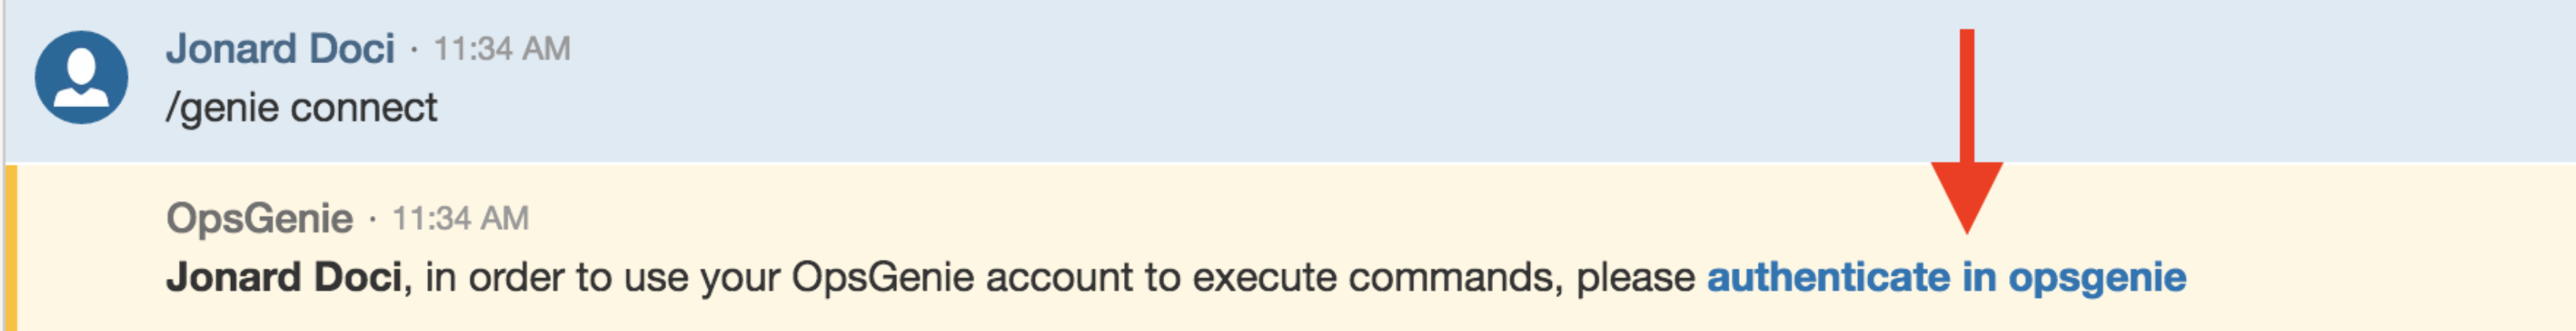 An image showing how to connect a command for HipChat.